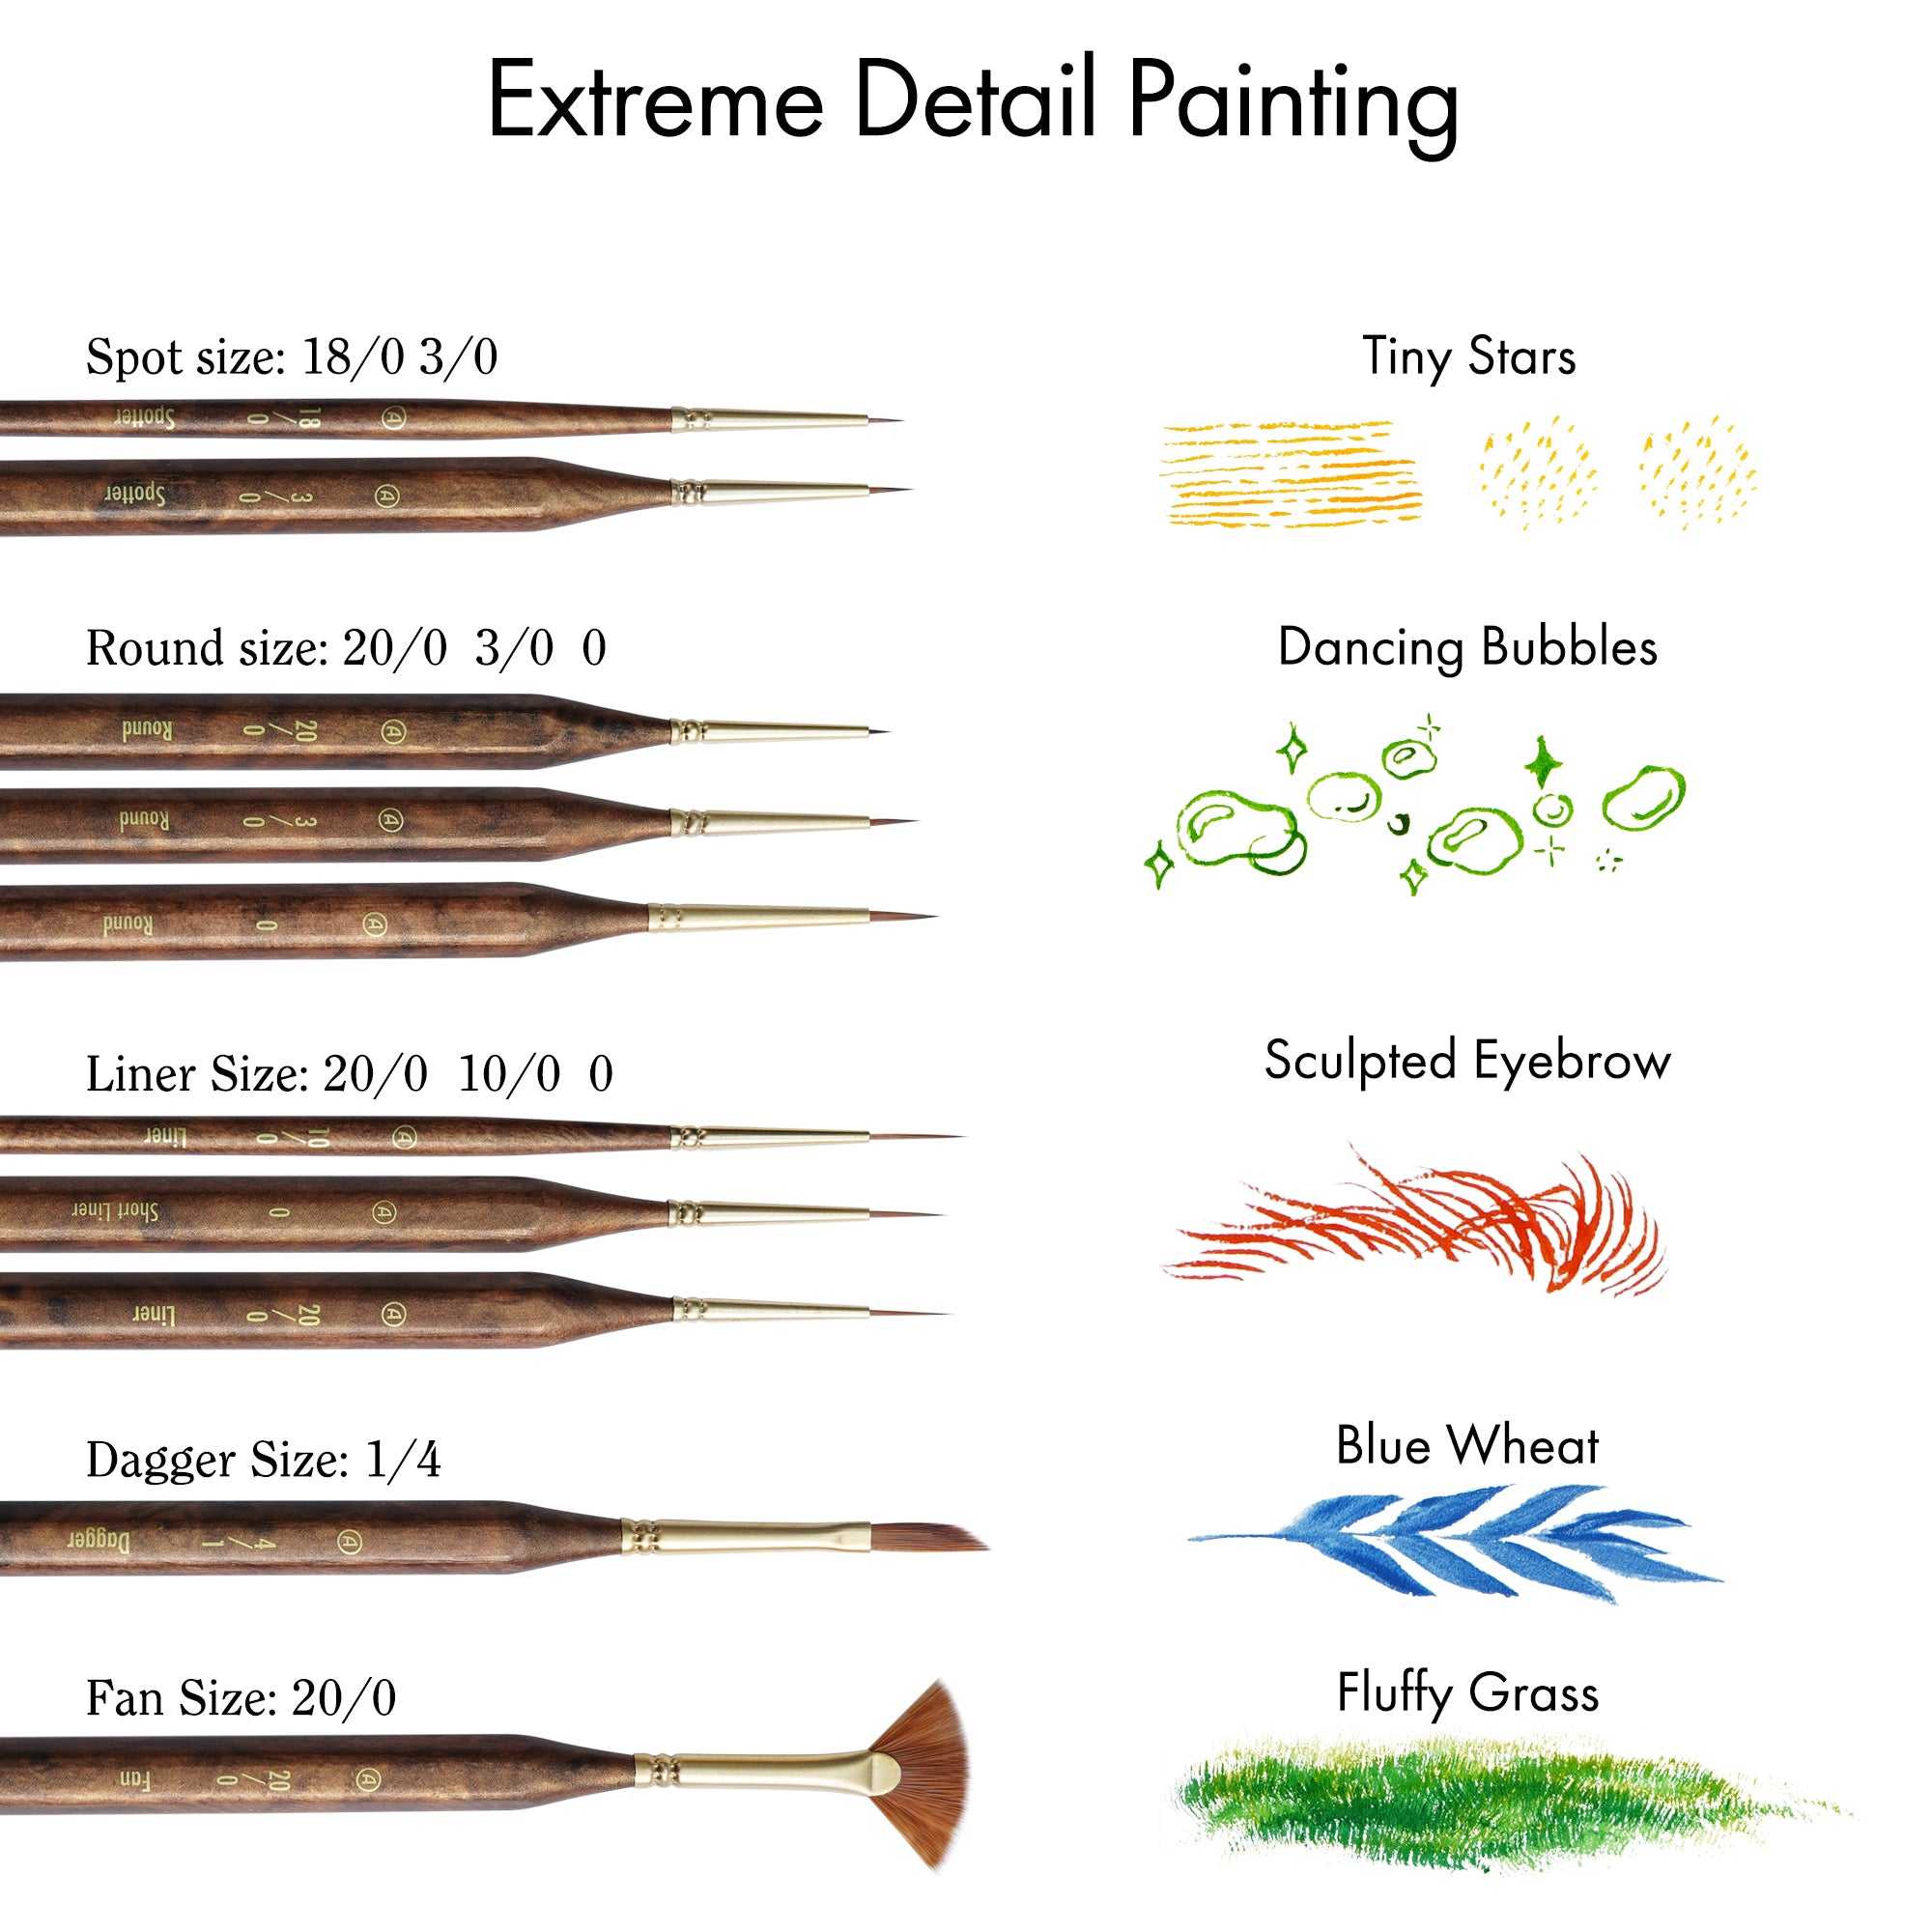 10PCS  Ultra Detail Paint Brushes Crafted For Ultra-fine Detailing And The Utmost Precision